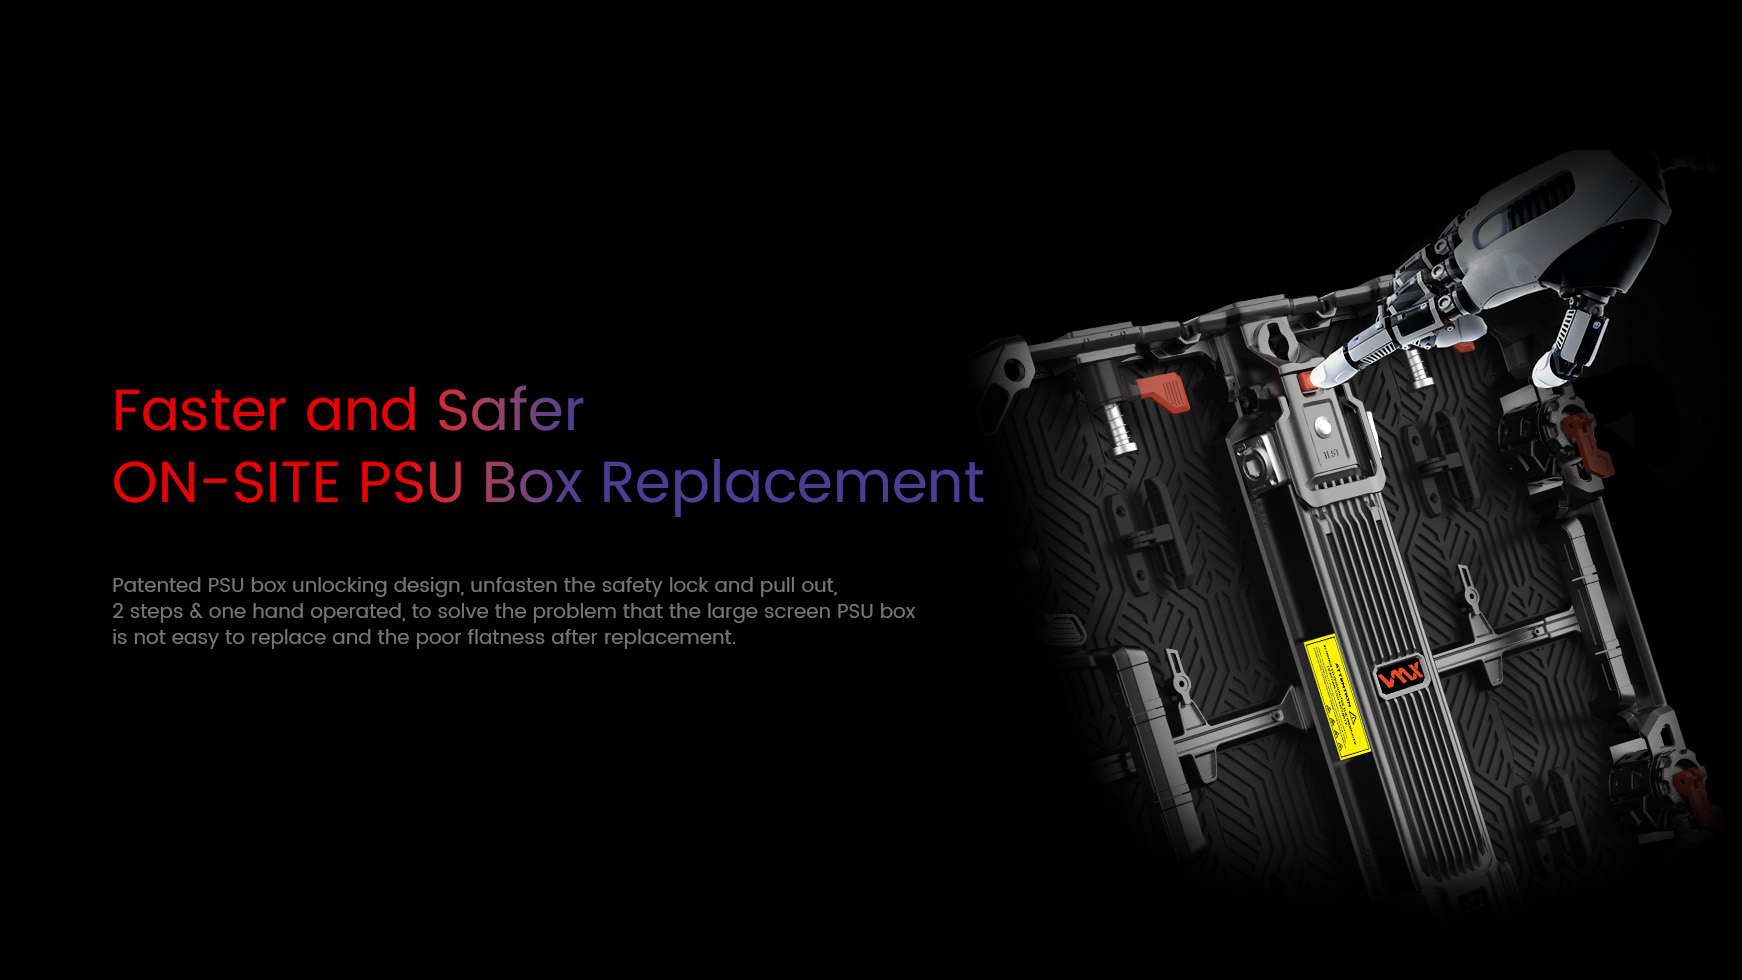 Faster and Safer ON-SITE PSU box replacement. Patented PSU box unlocking design, unfasten the safety lock and pull out, 2 s teps & one hand operated, to solve the problem that the large screen PSU box  is not easy to replace and the poor flatness after replacement.